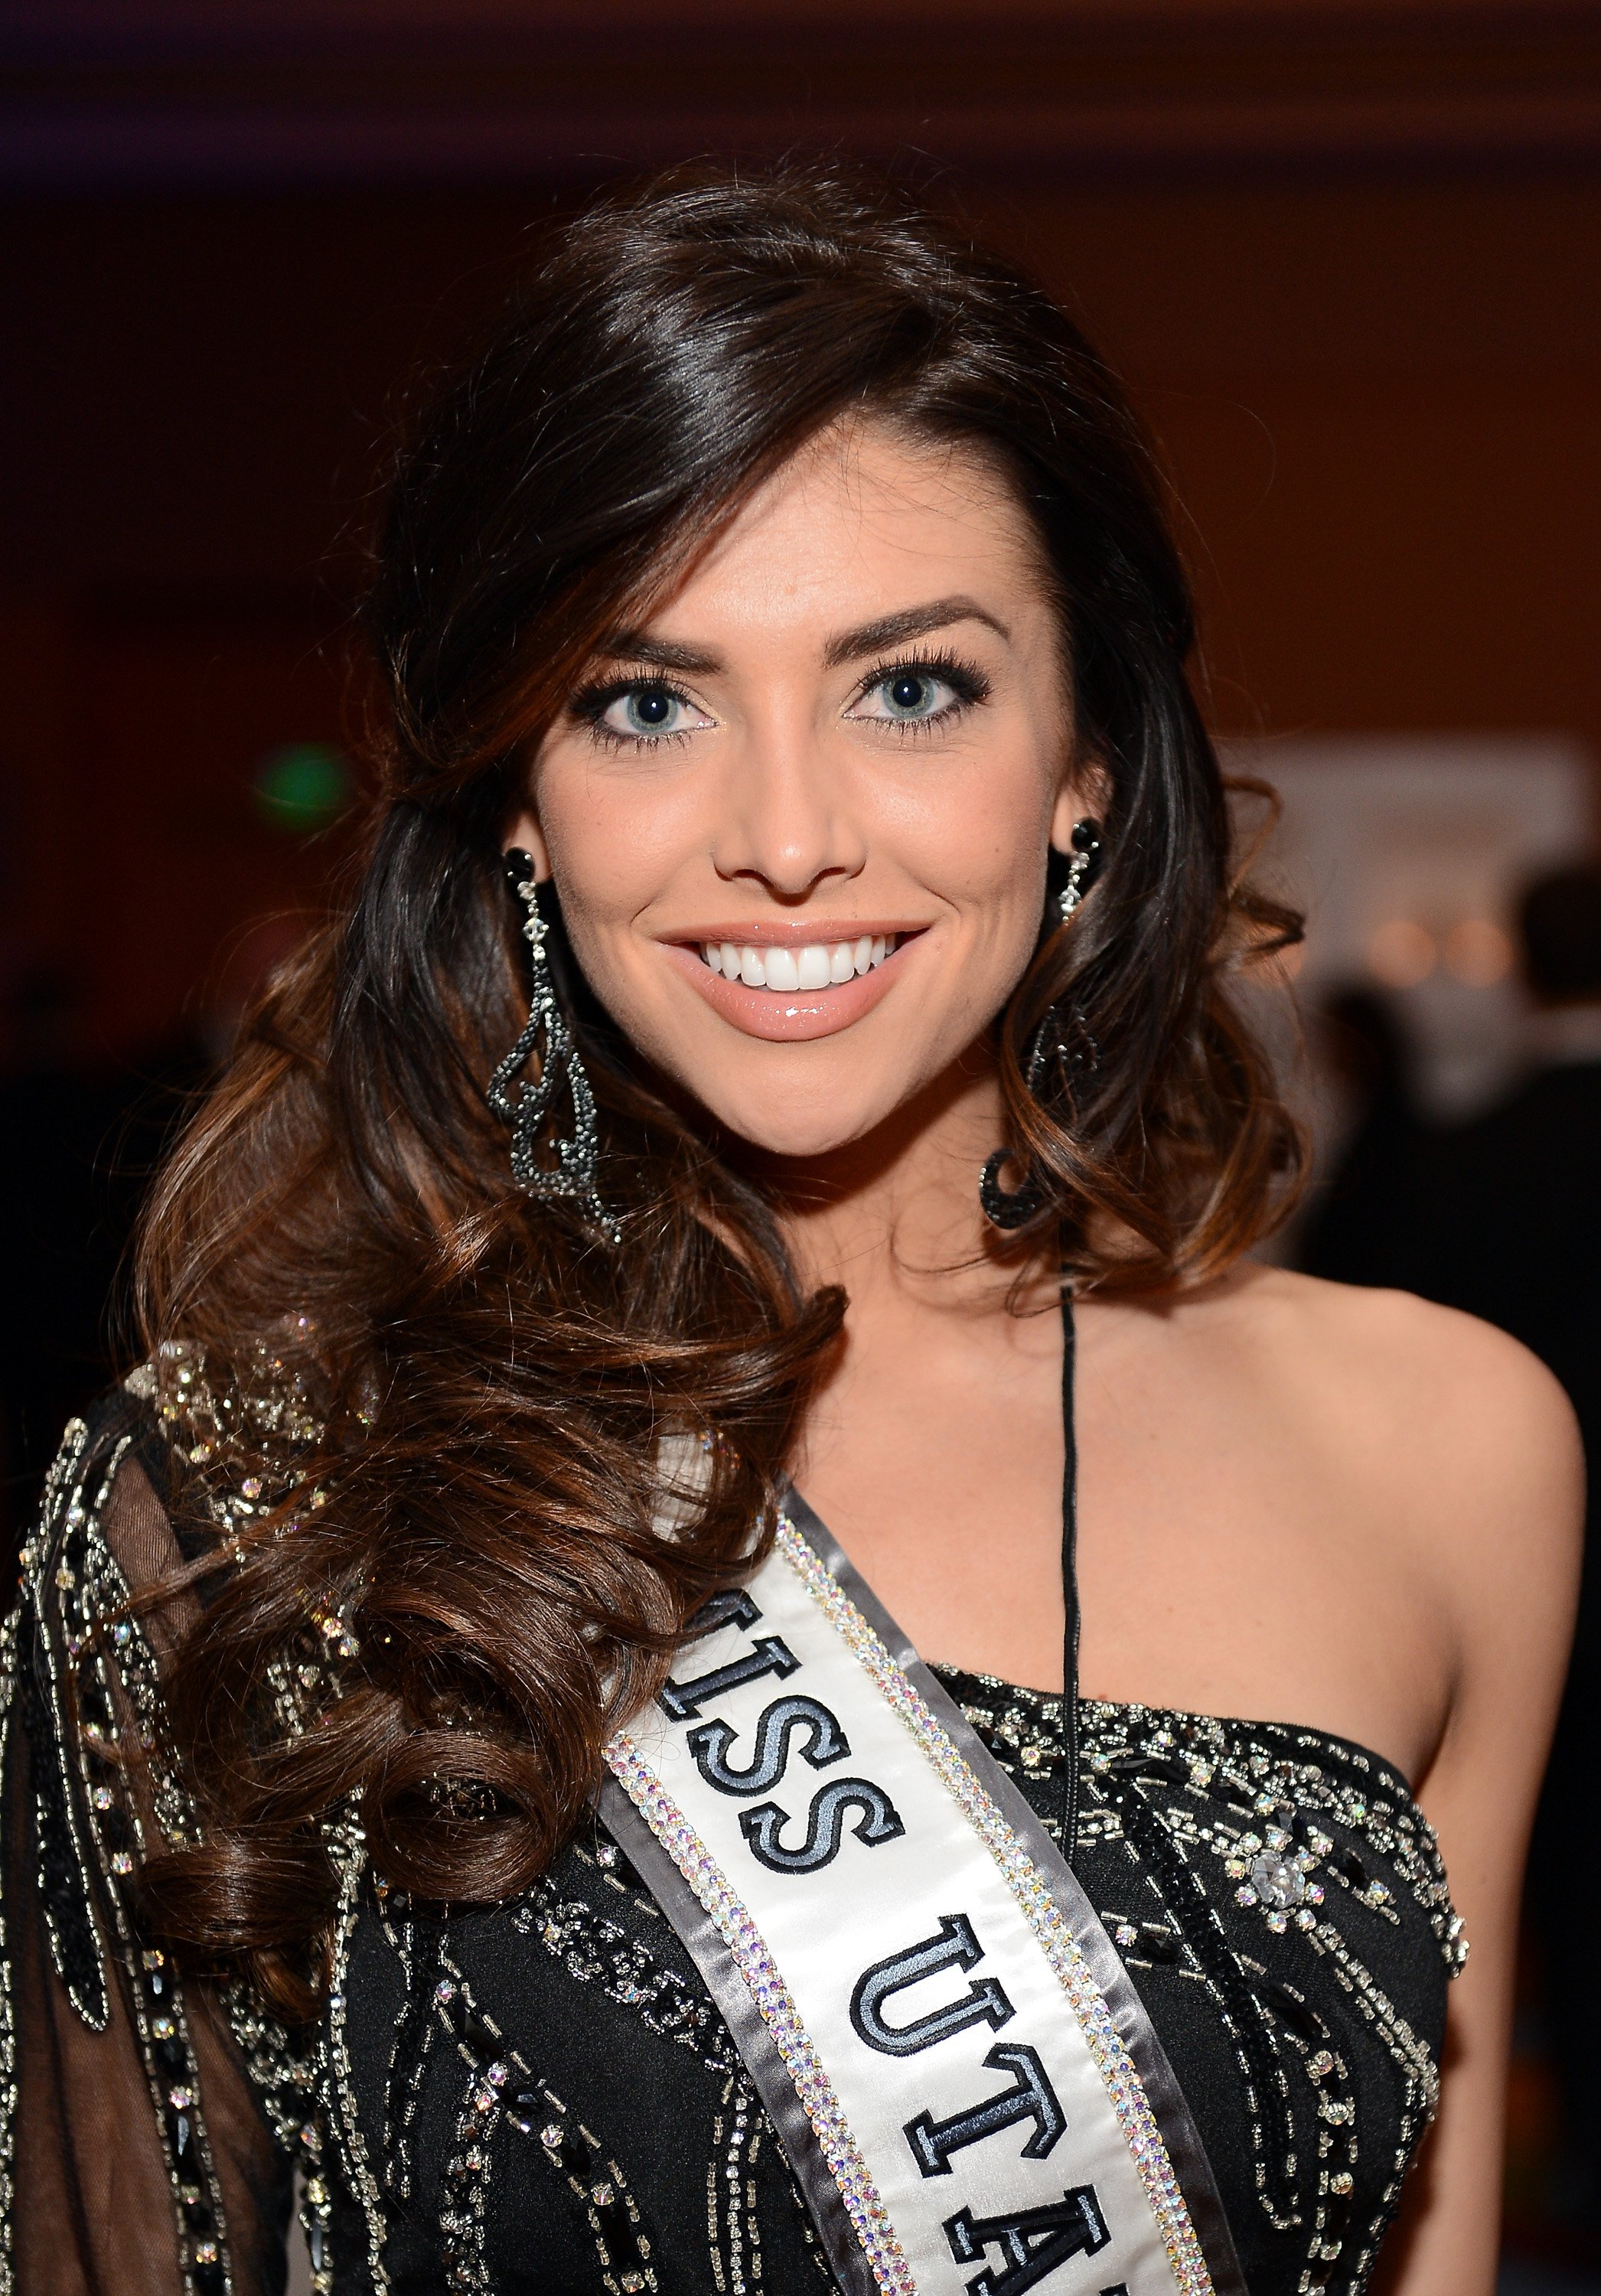 Miss Utah Marissa Powell at the 2013 Miss USA Pageant in Phoenix, Arizona. | Source: Getty Images